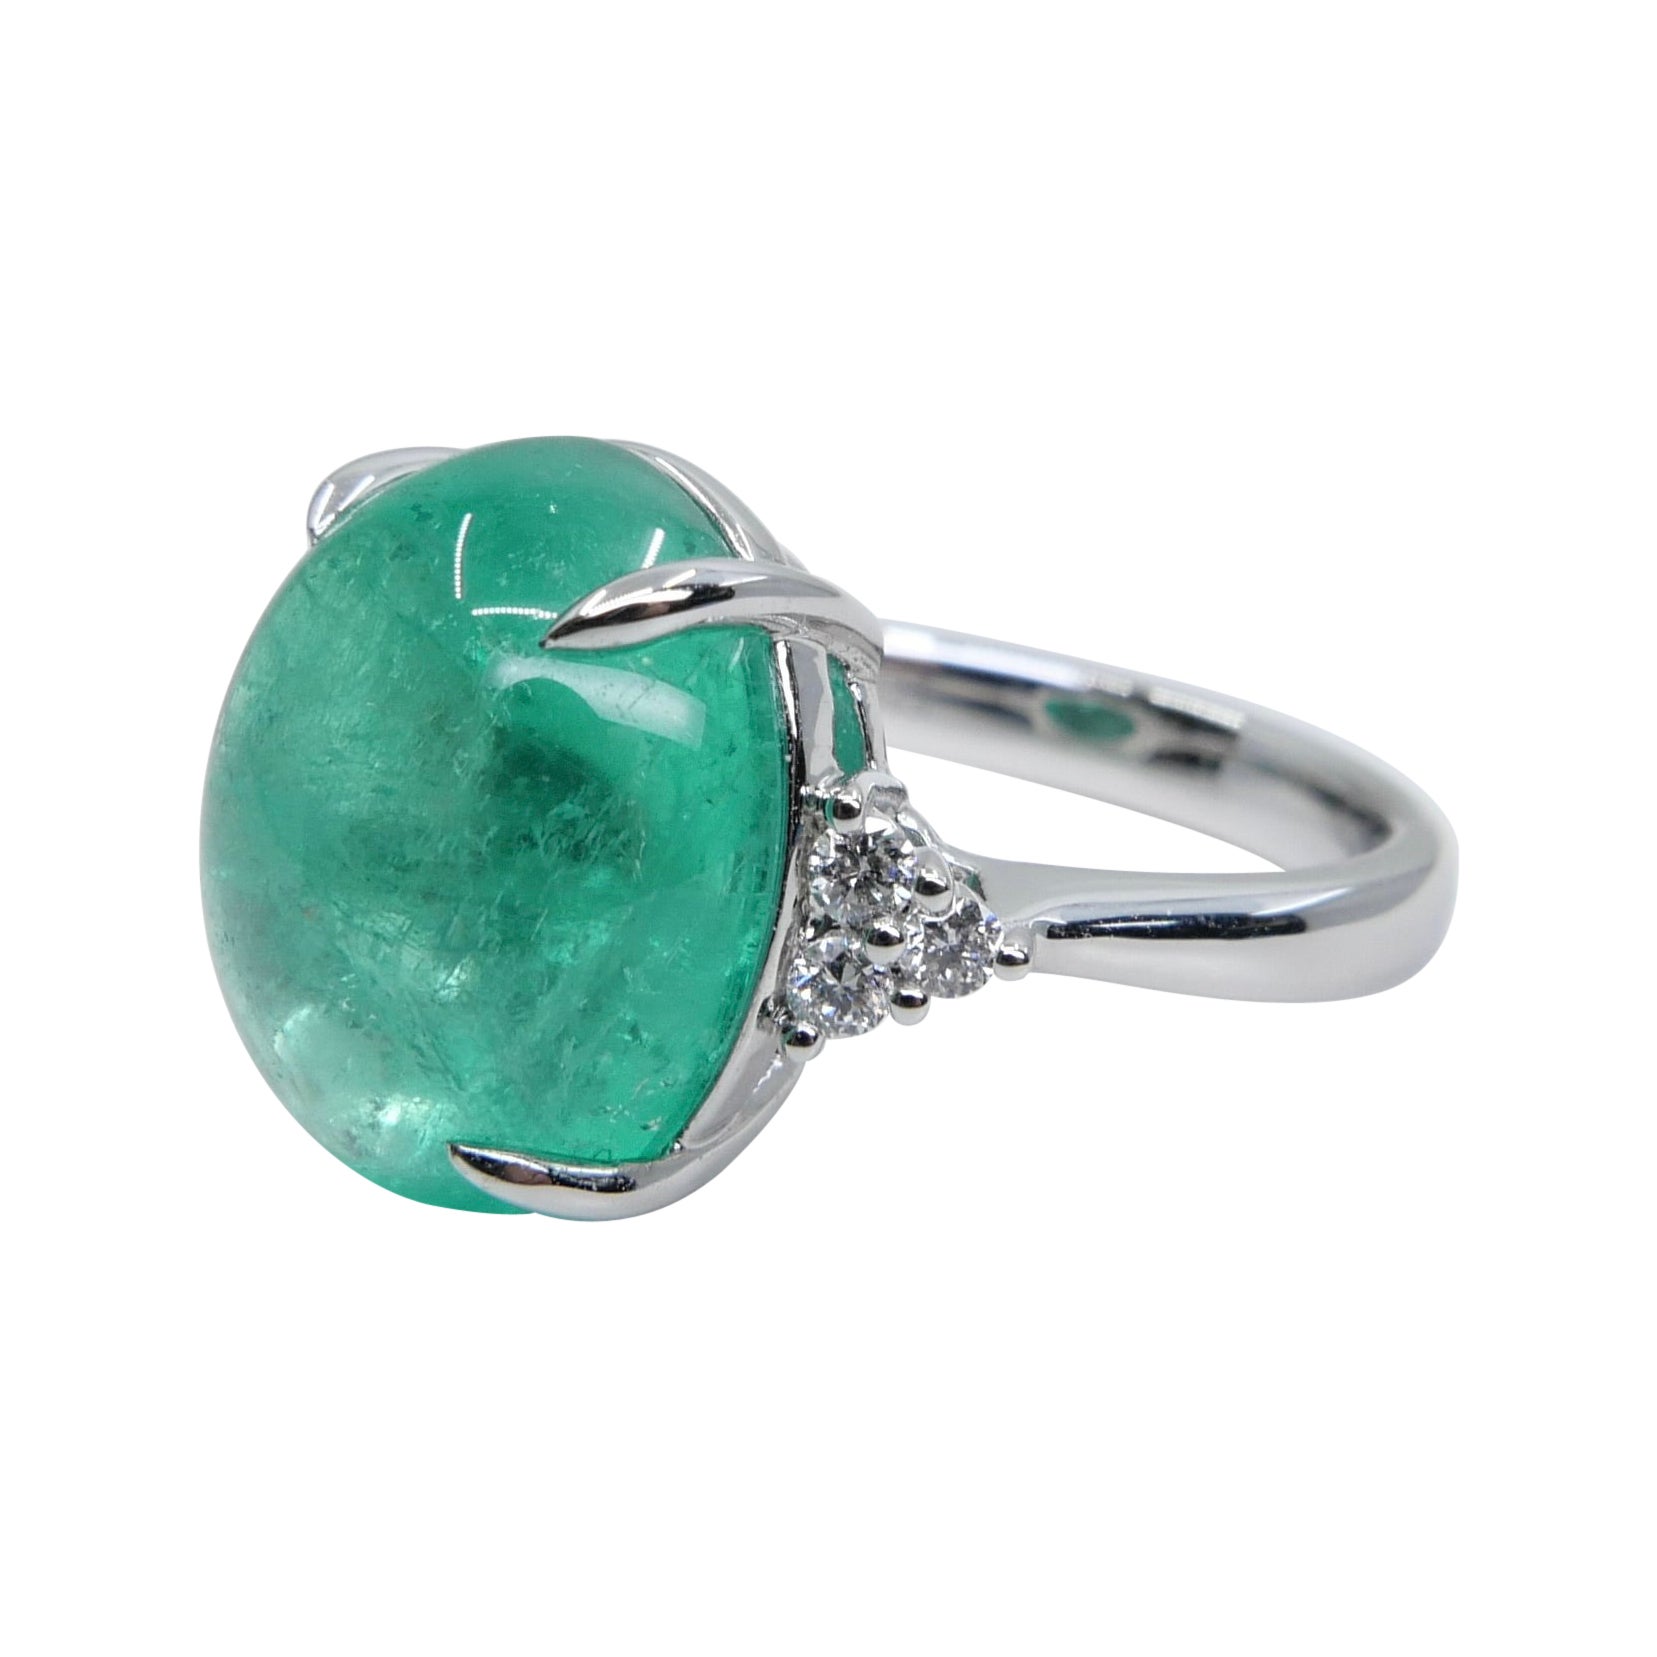 GRS Certified 10.06 Cts Columbian Minor Emerald Ring. Large Statement Ring